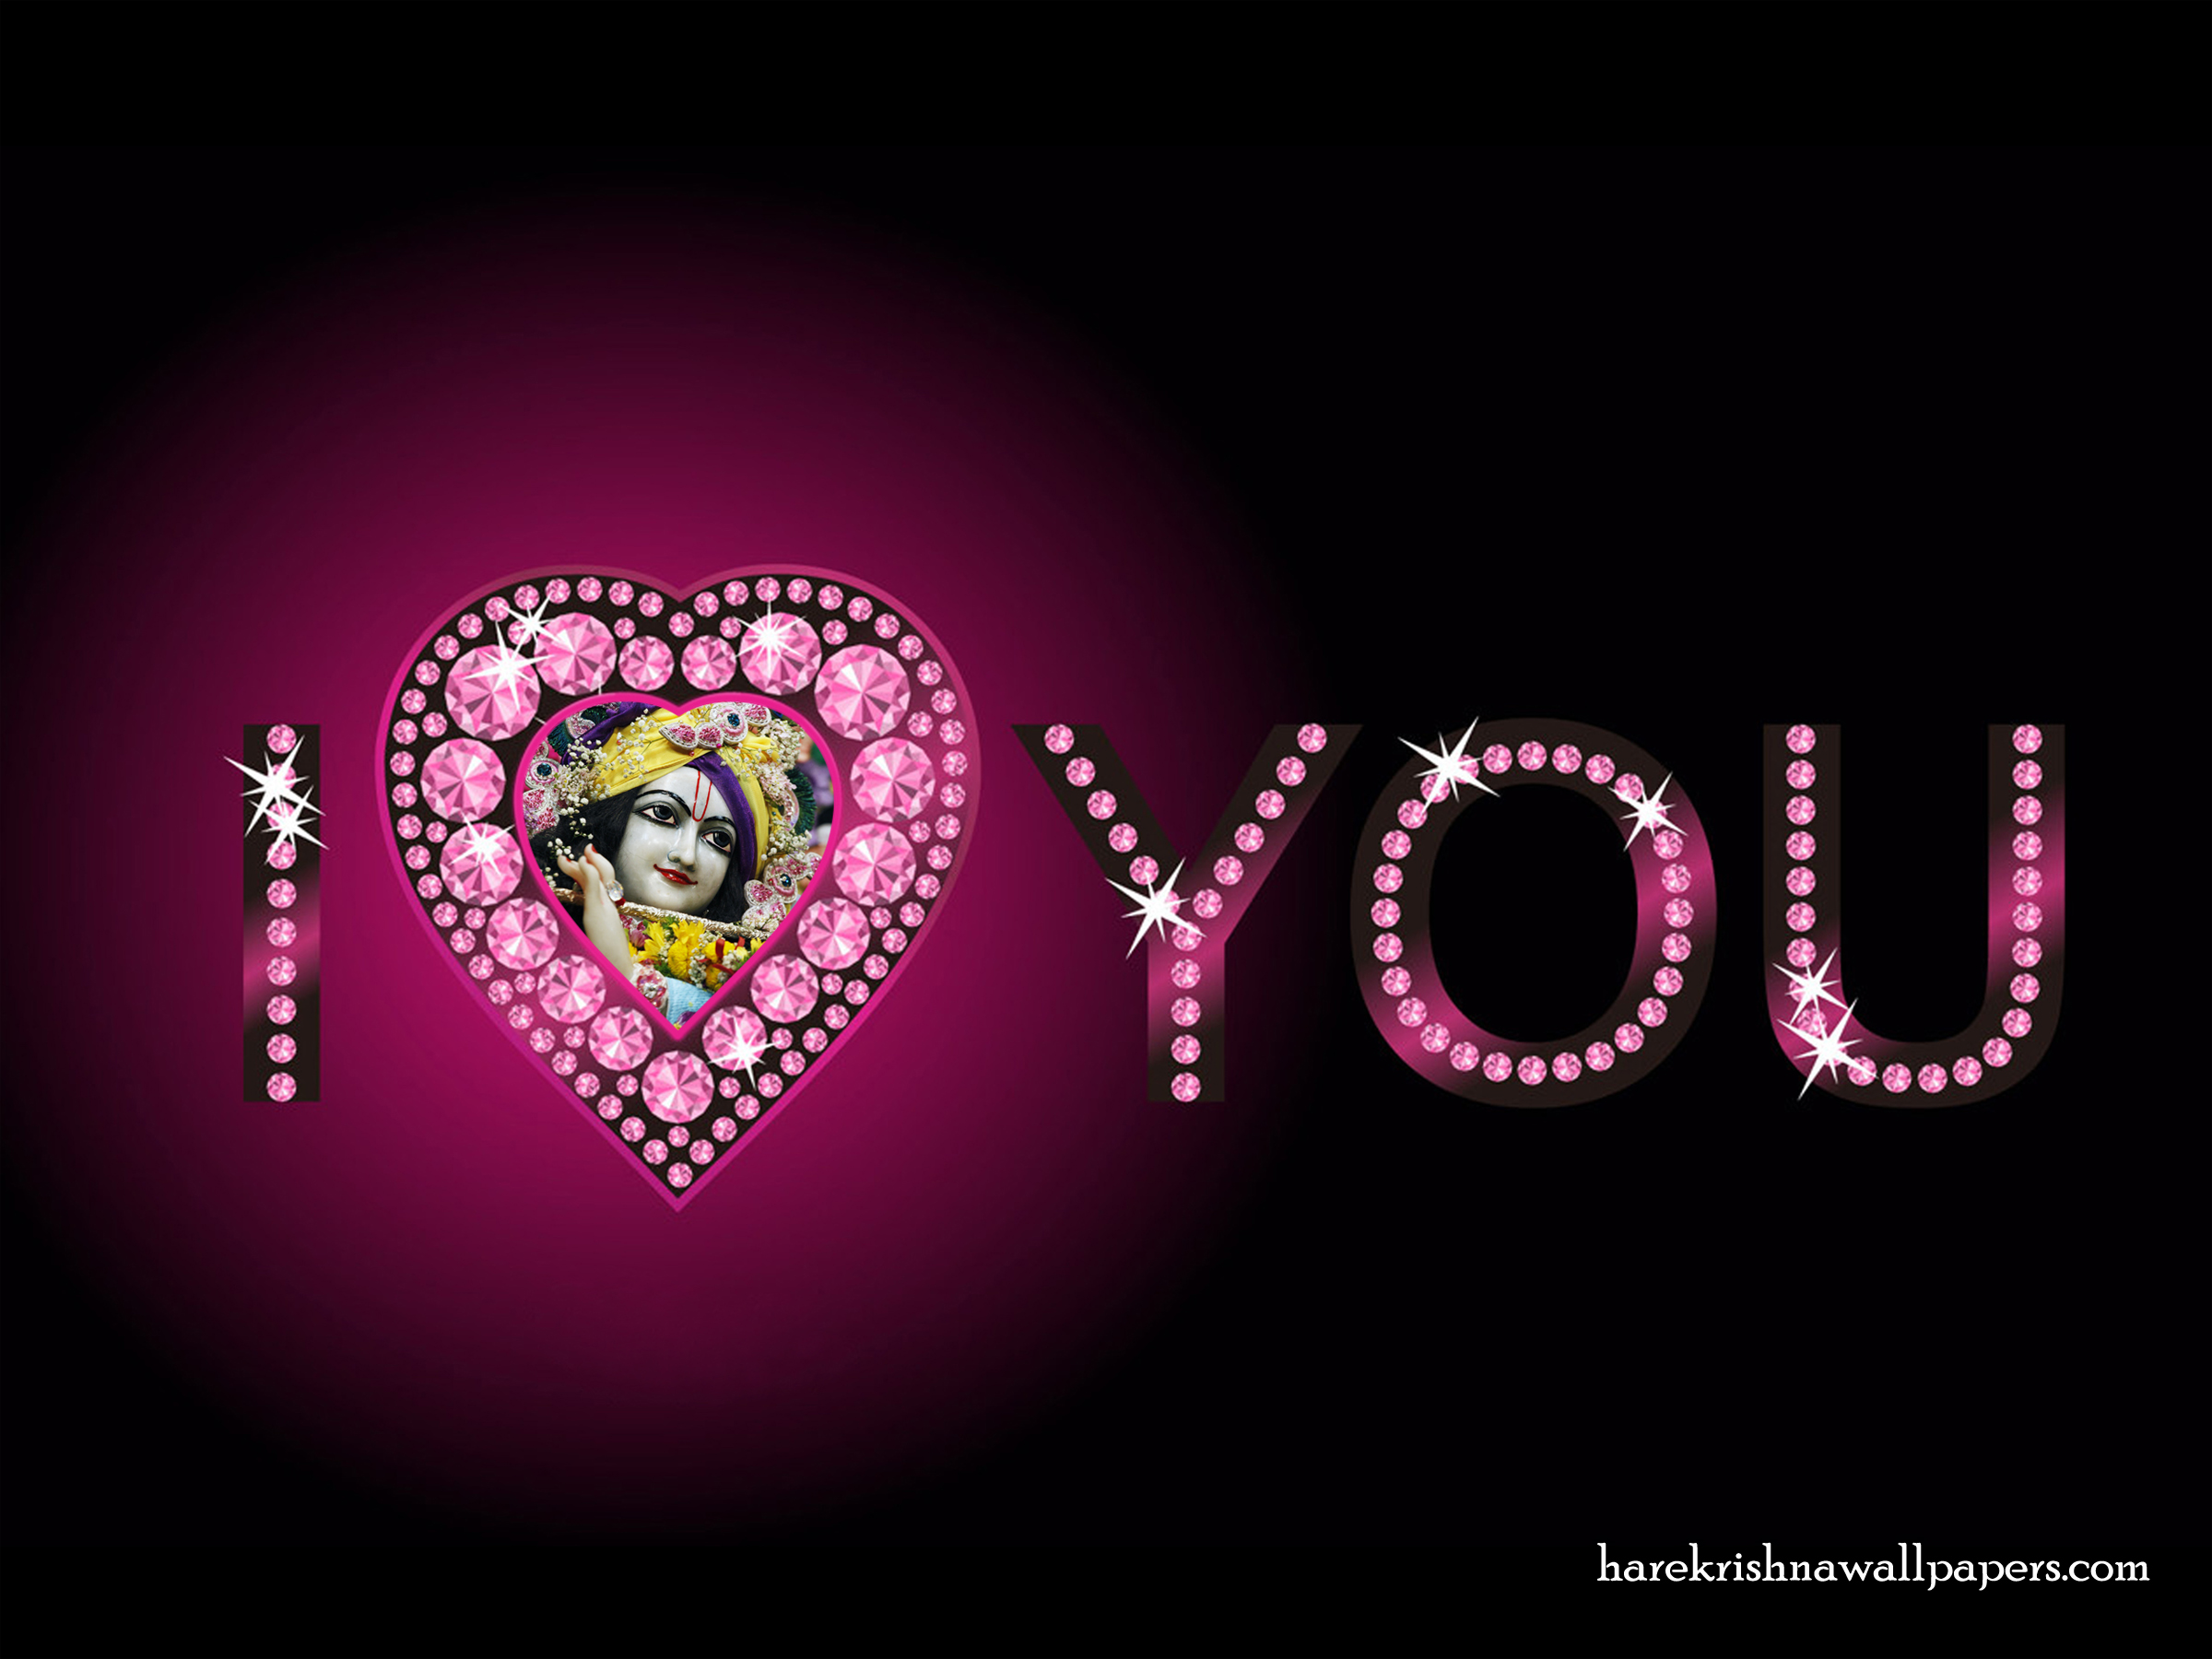 I Love You Gopinath Wallpaper (002) Size 2400x1800 Download